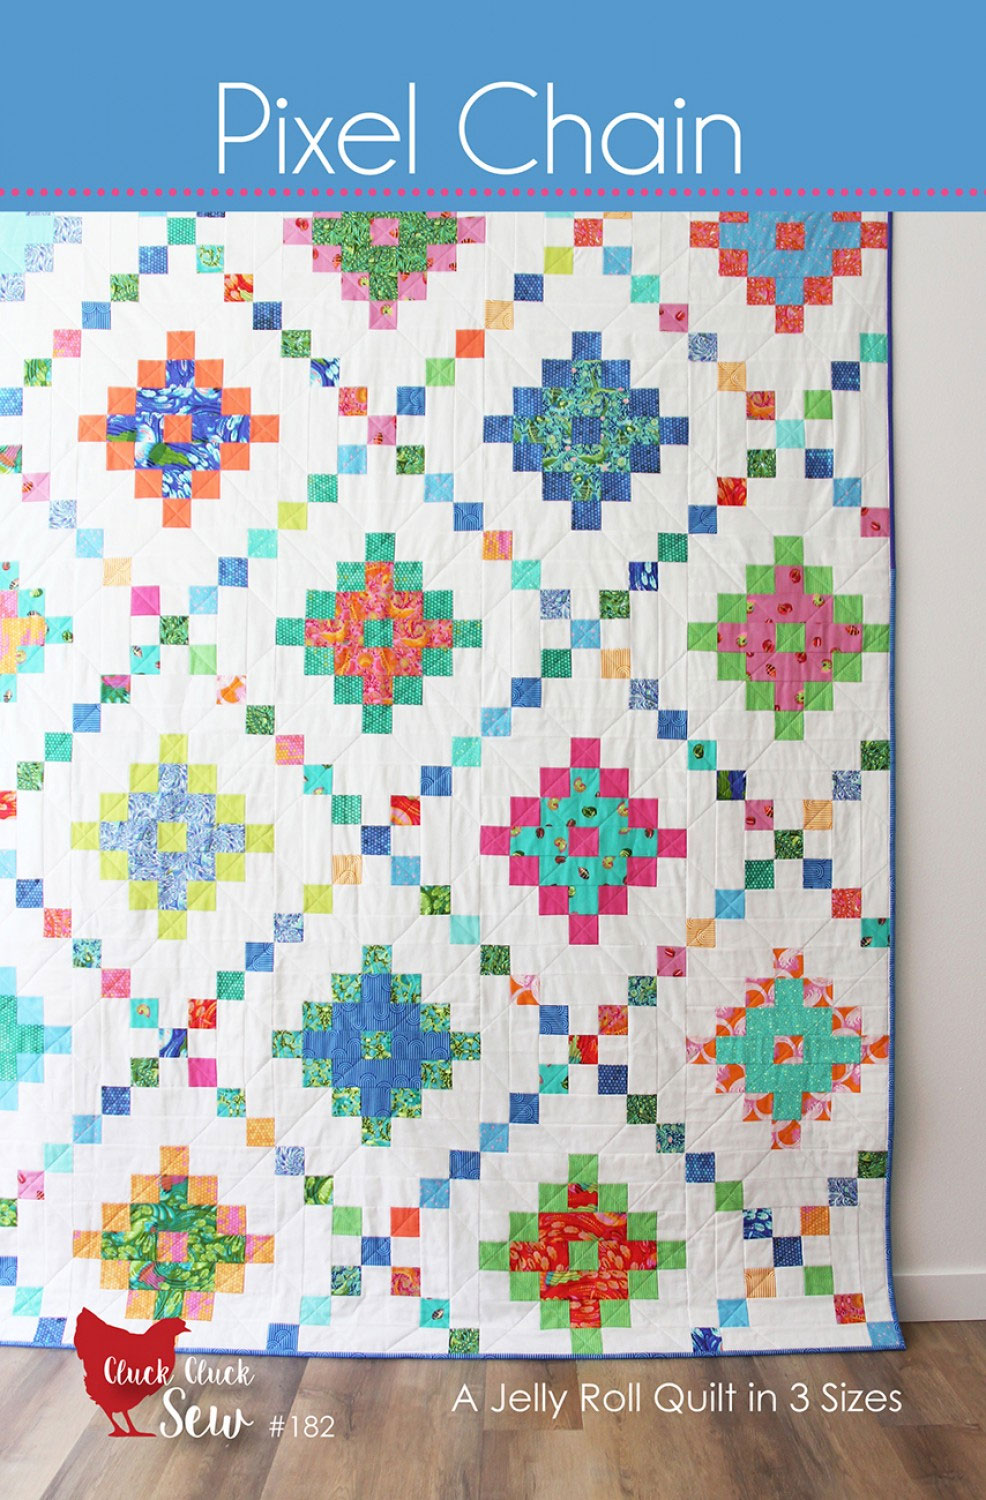 Pixel-Chain-quilt-sewing-pattern-Cluck-Cluck-Sew-front